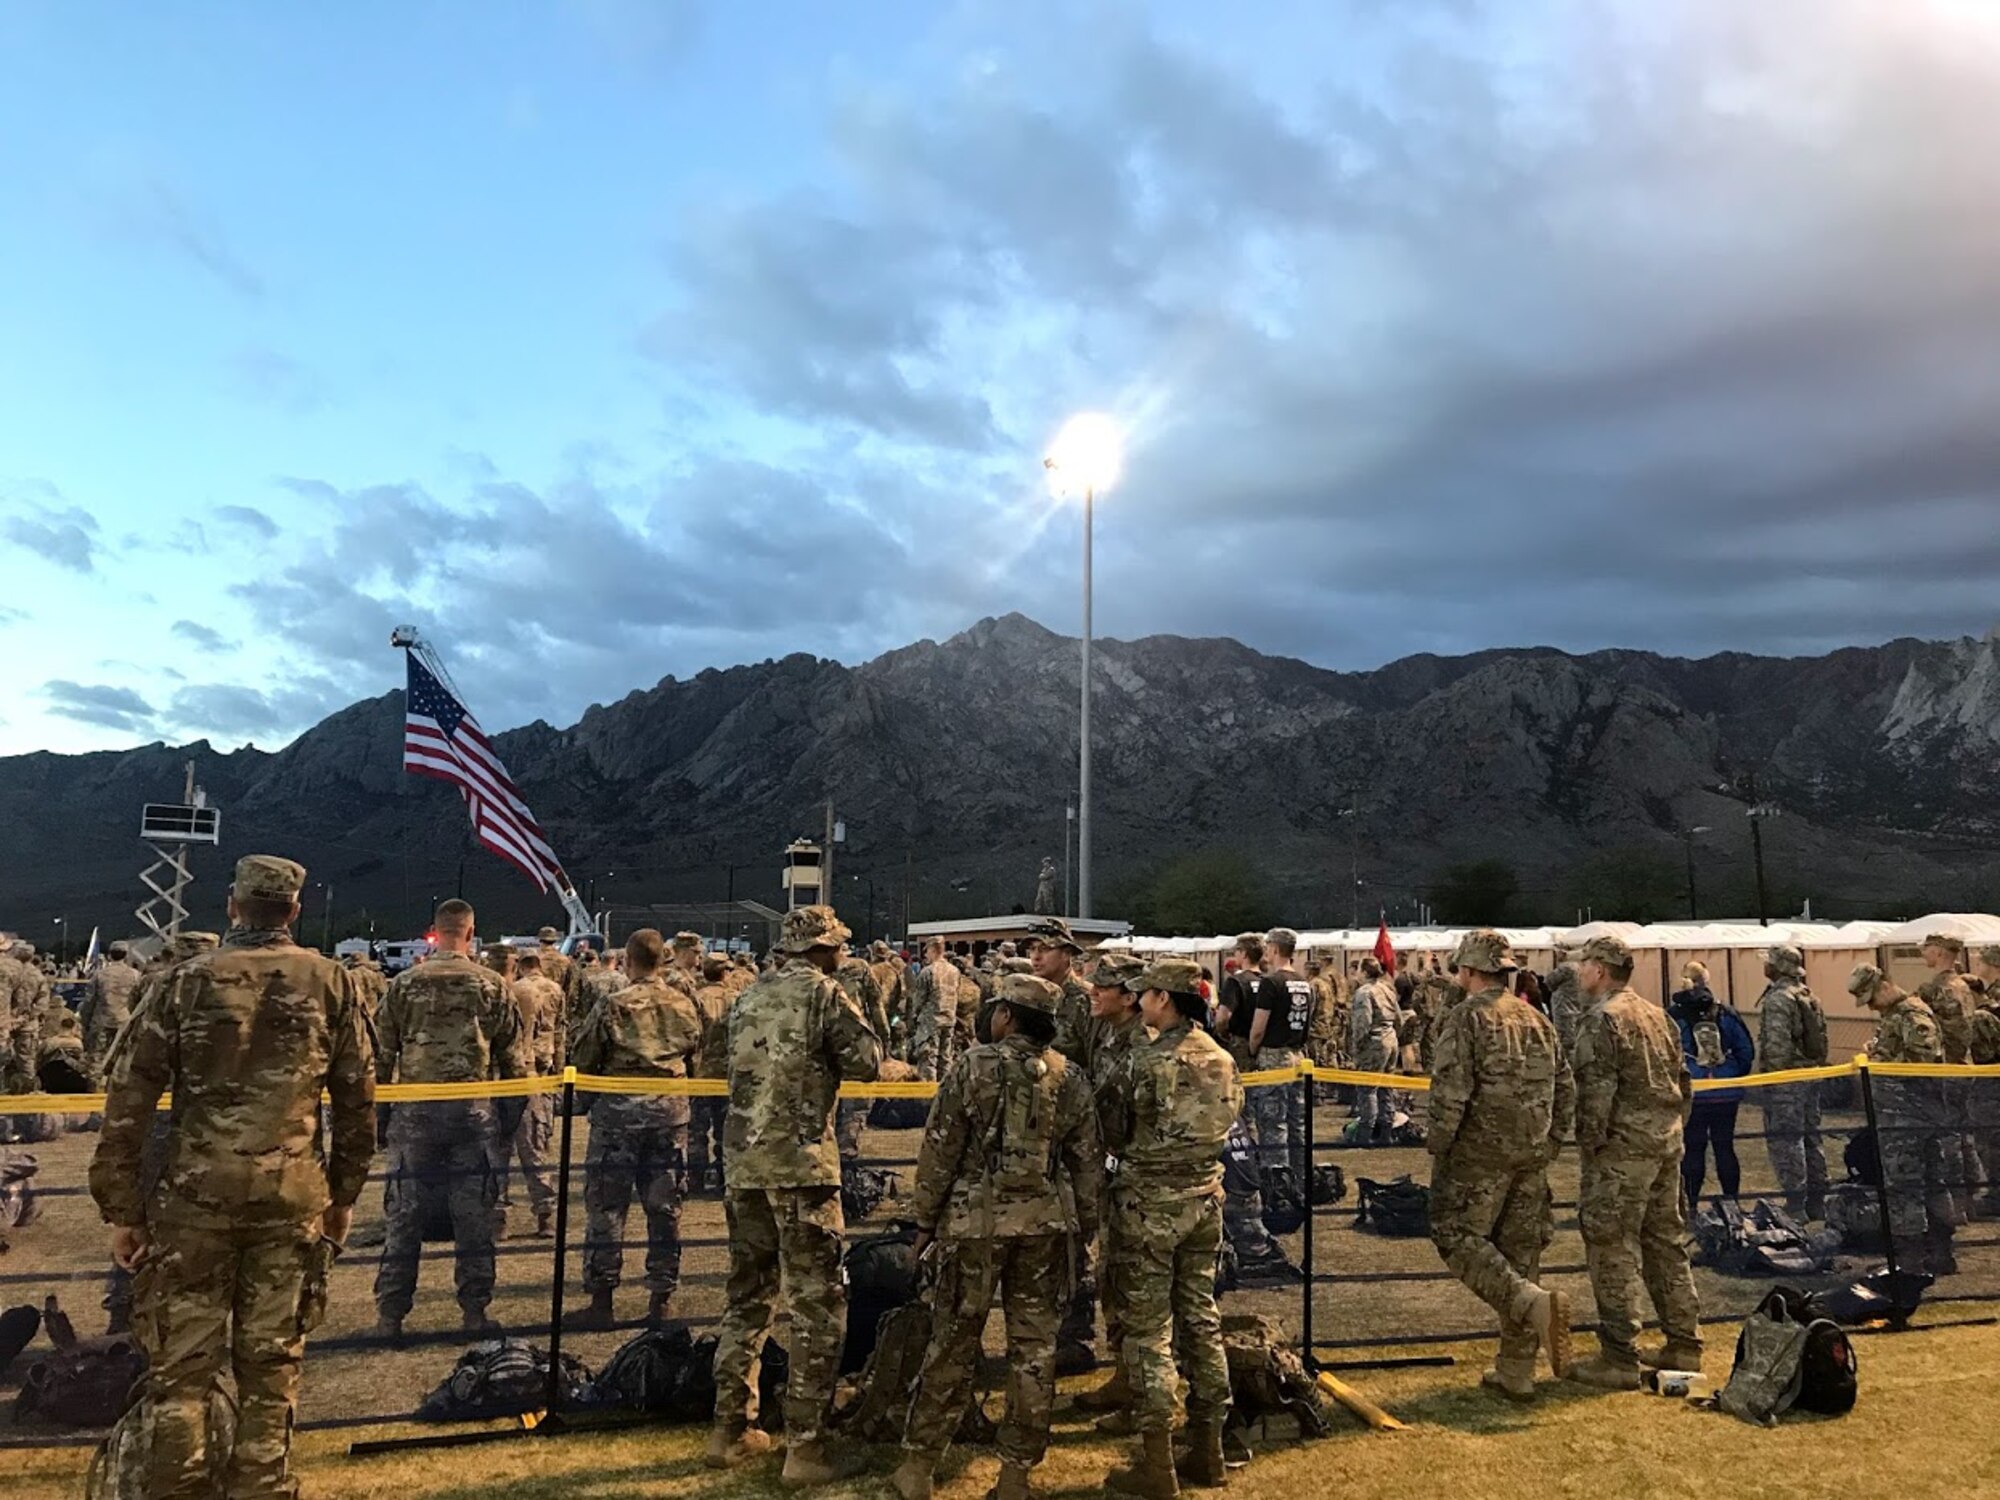 Participants of the 29th annual Bataan Memorial Death March, wait for the event to begin, March 25, 2018, at White Sands, N.M.